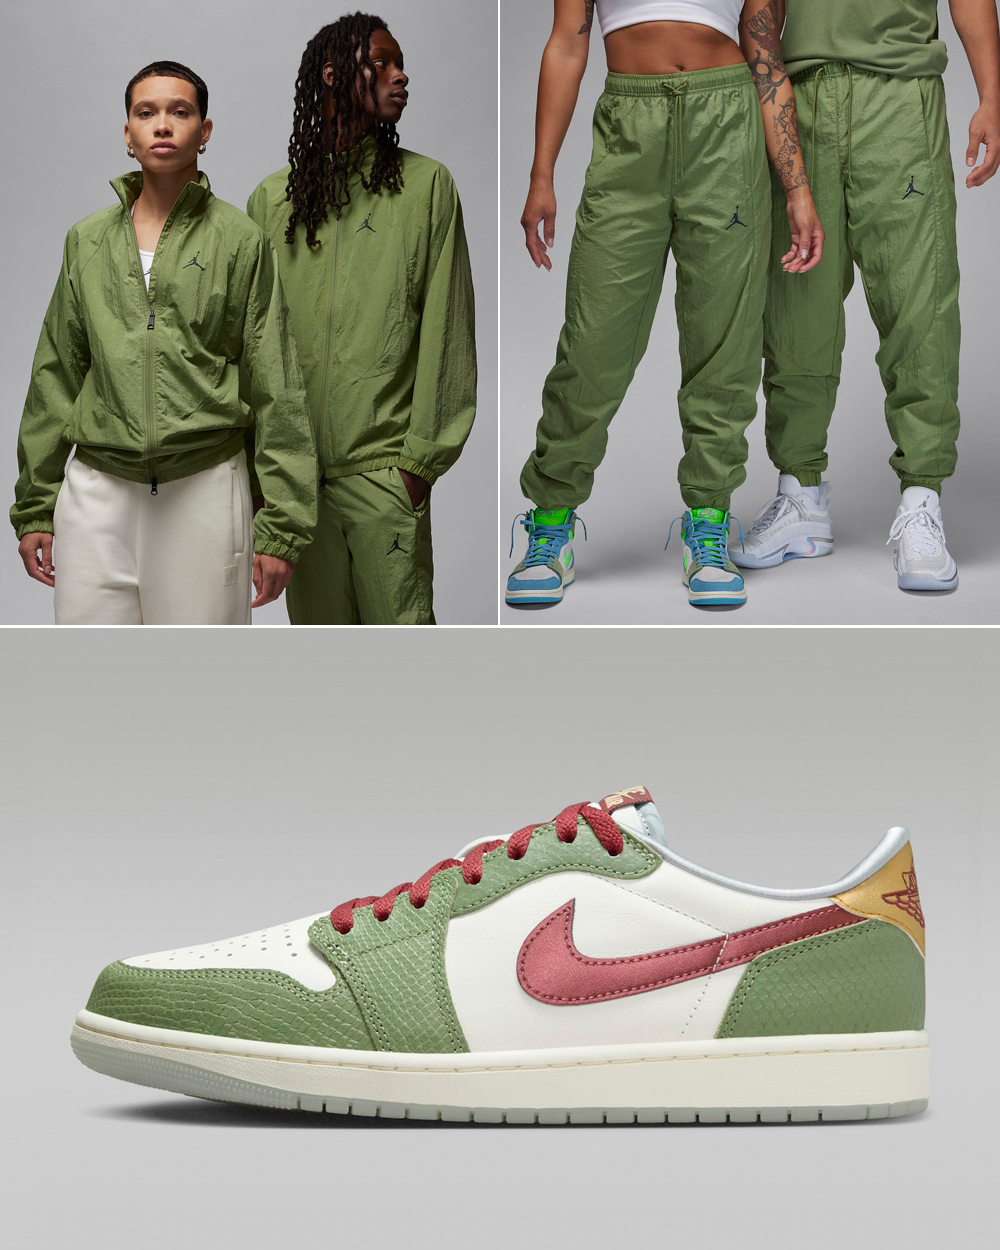 Air-Jordan-1-Low-OG-Year-of-the-Dragon-Chinese-New-Year-Jacket-Pants-Outfit